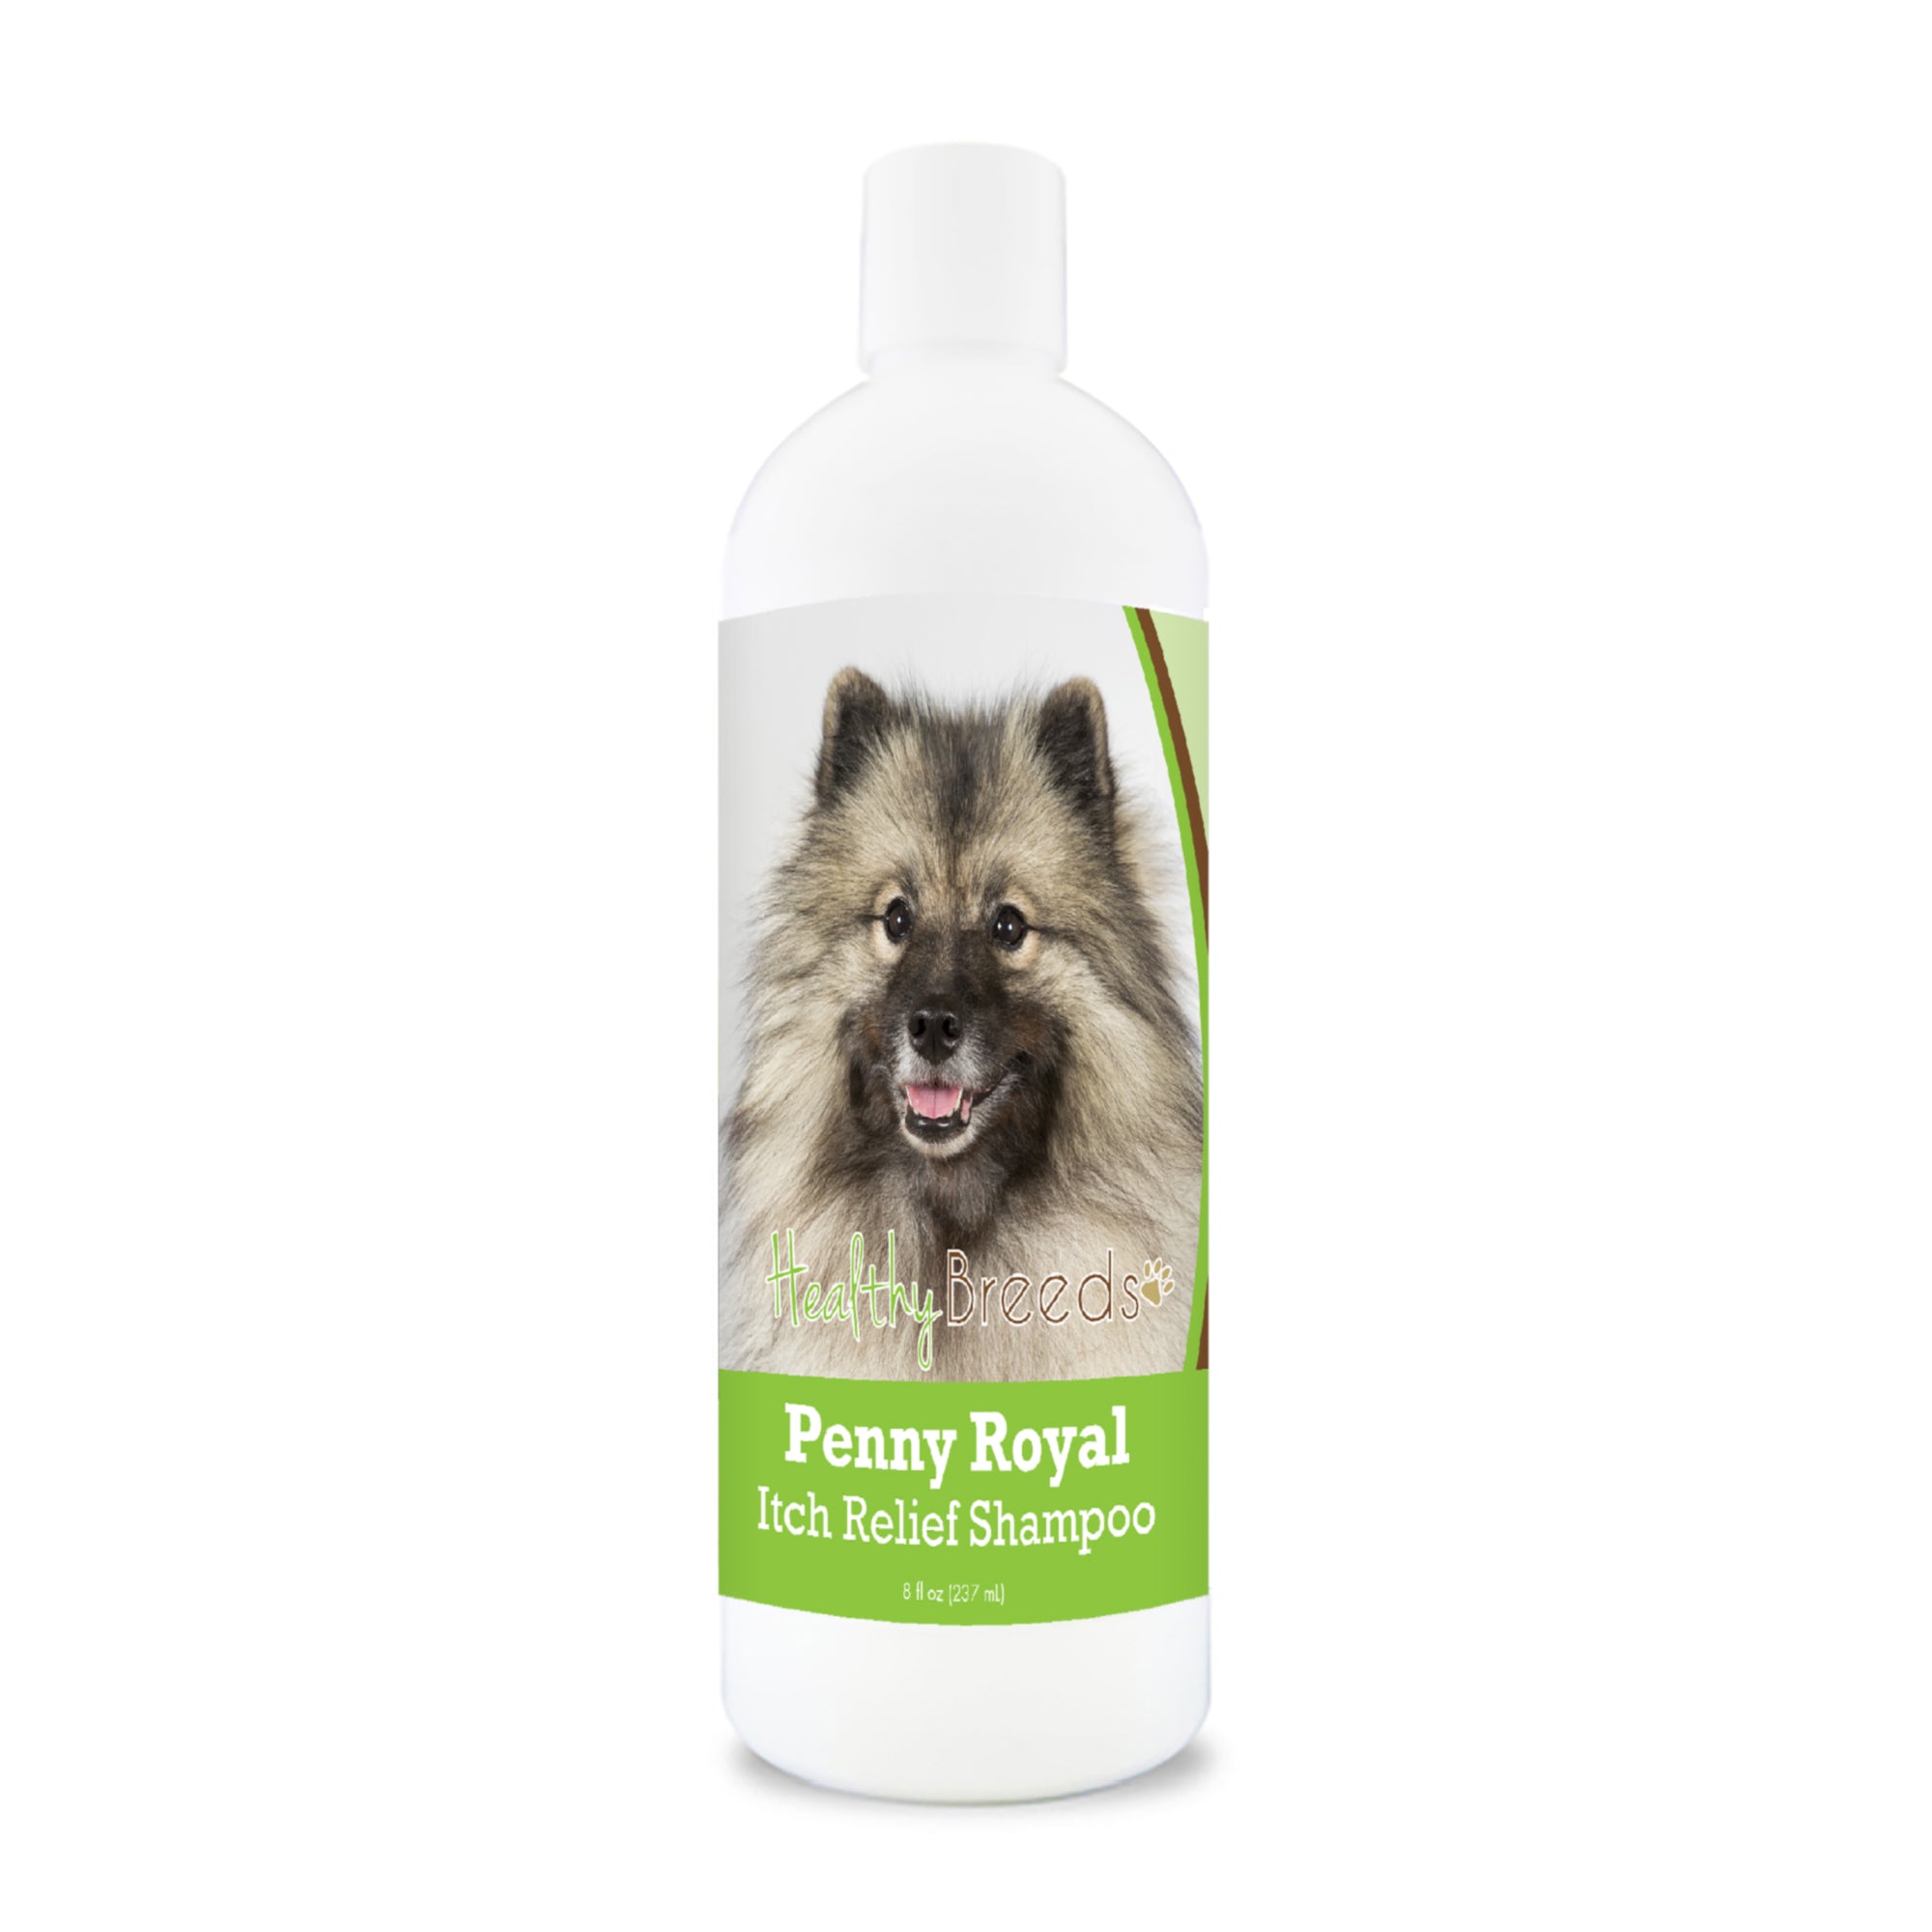 Keeshonden Penny Royal Itch Relief Shampoo 8 oz